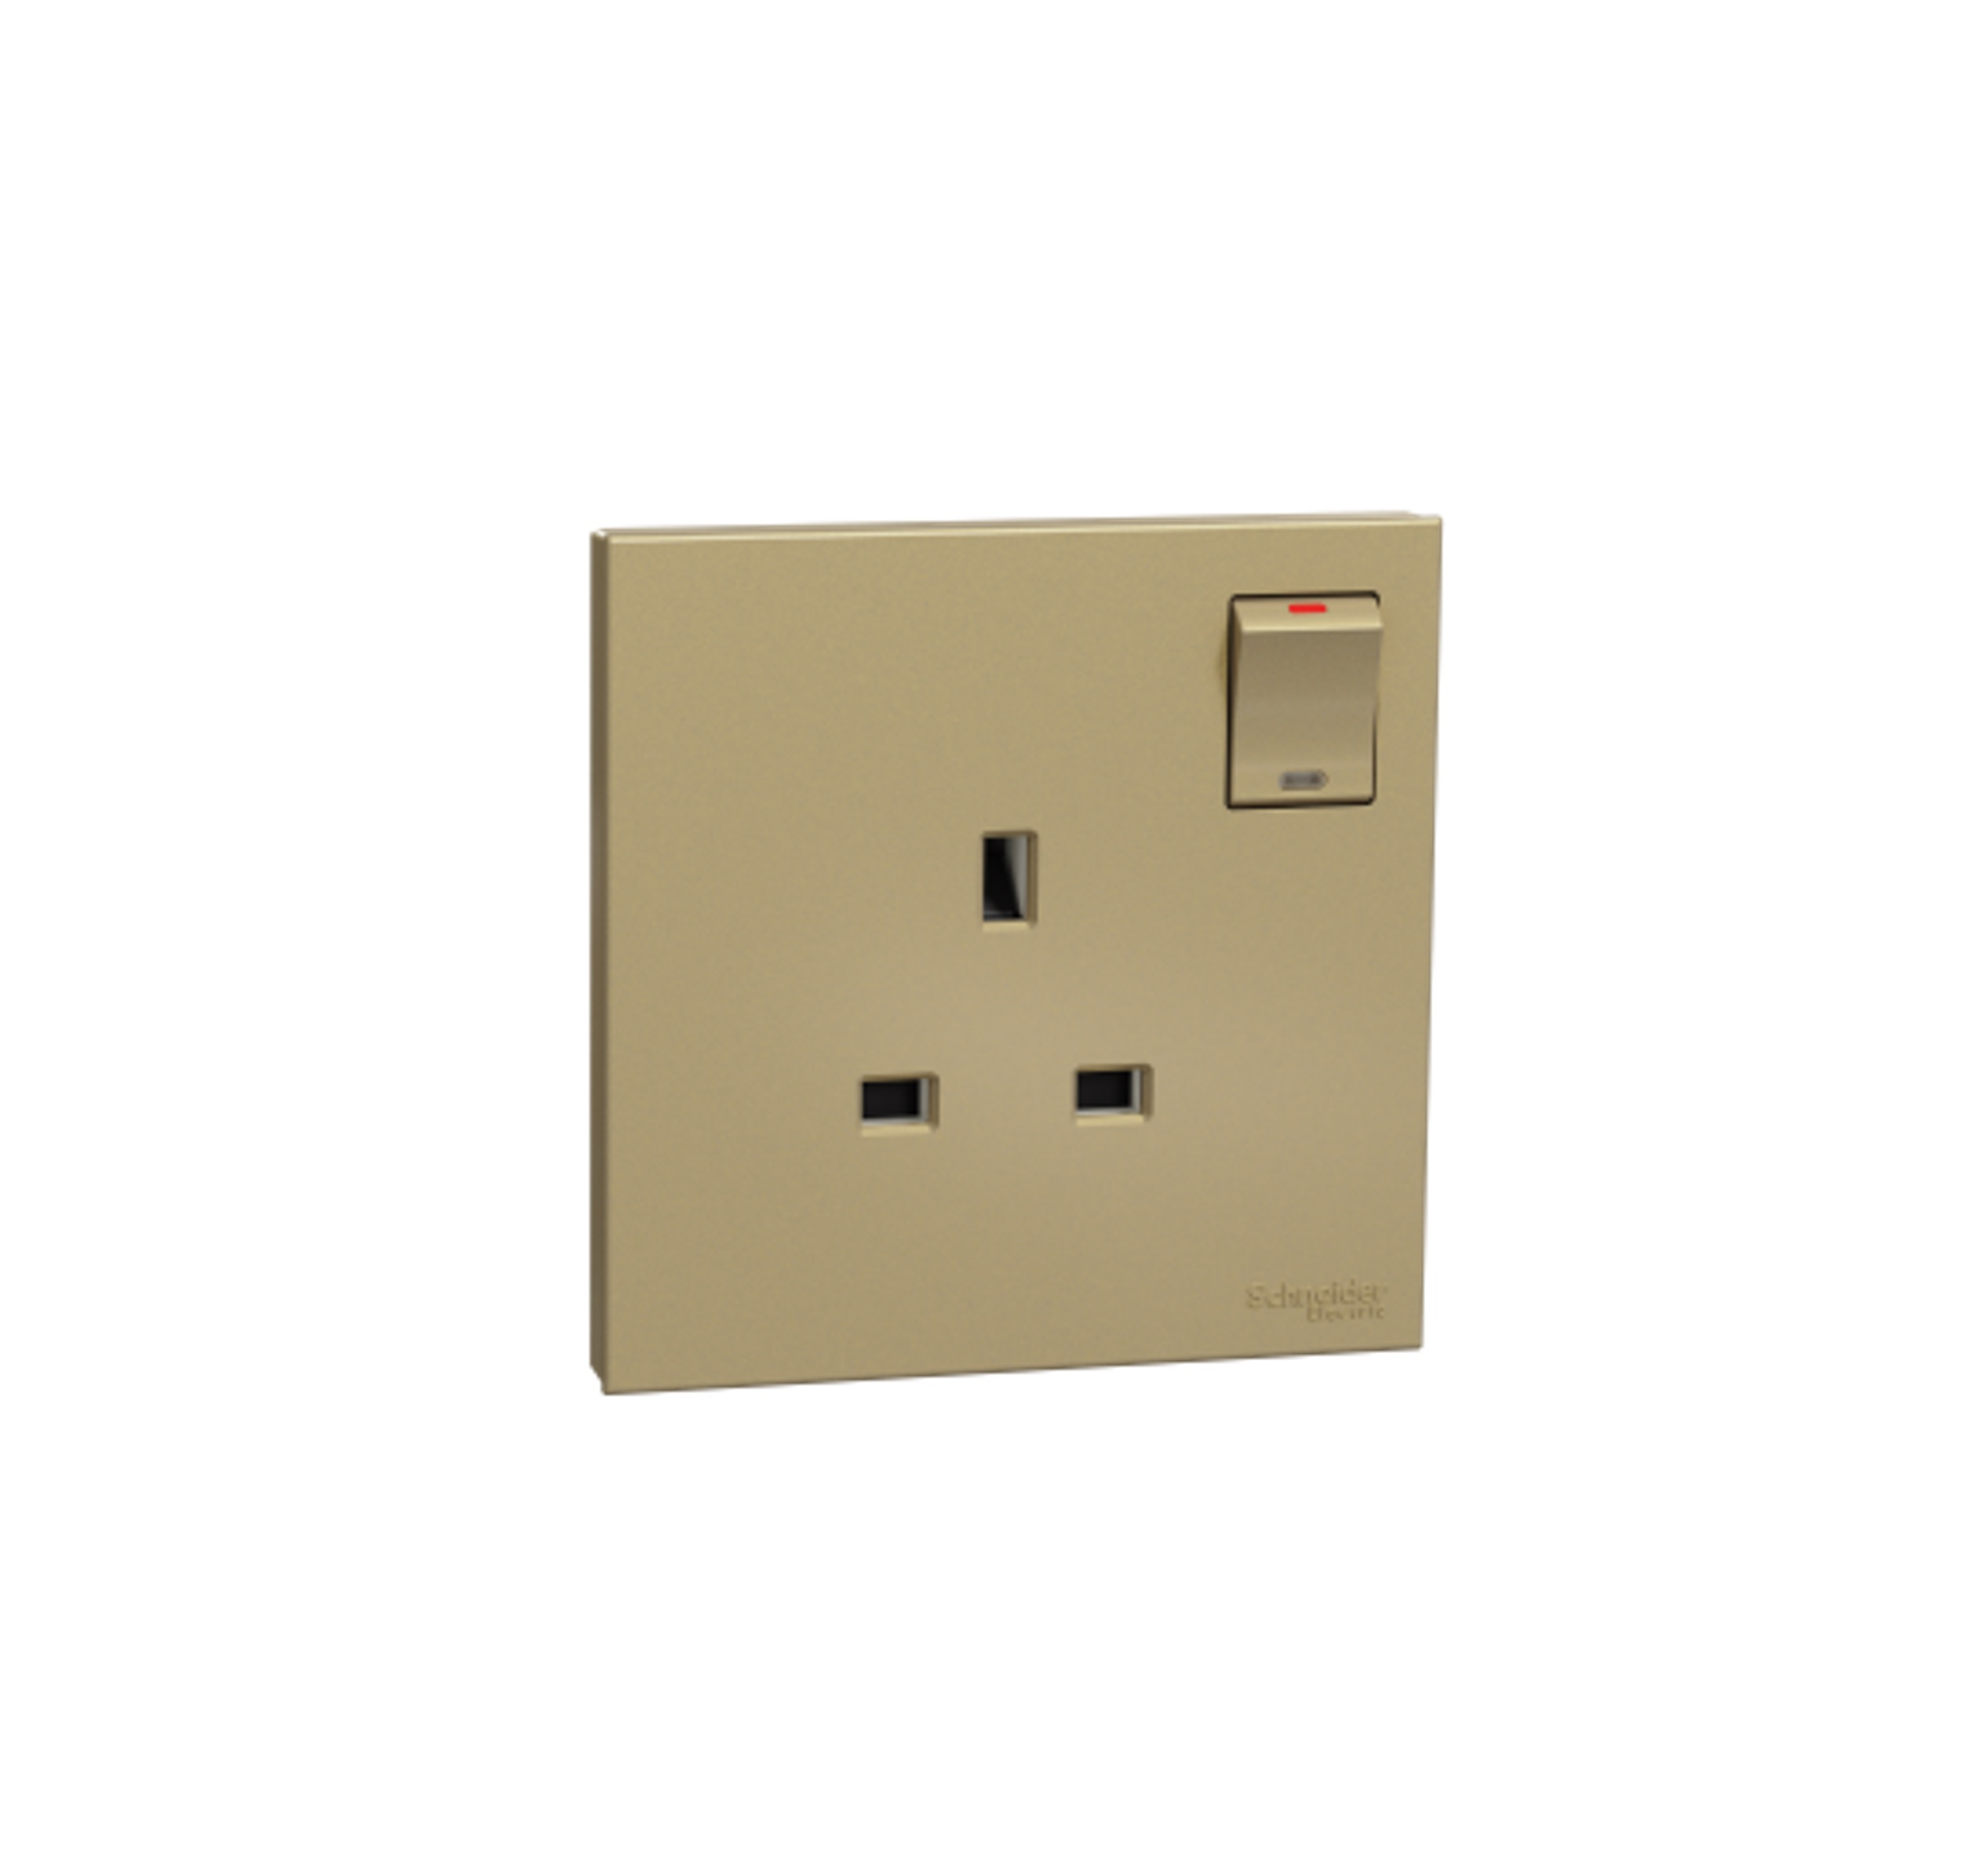 AvatarOn C - 13A 250V 1 Gang Switched Socket with LED (Wine Gold)